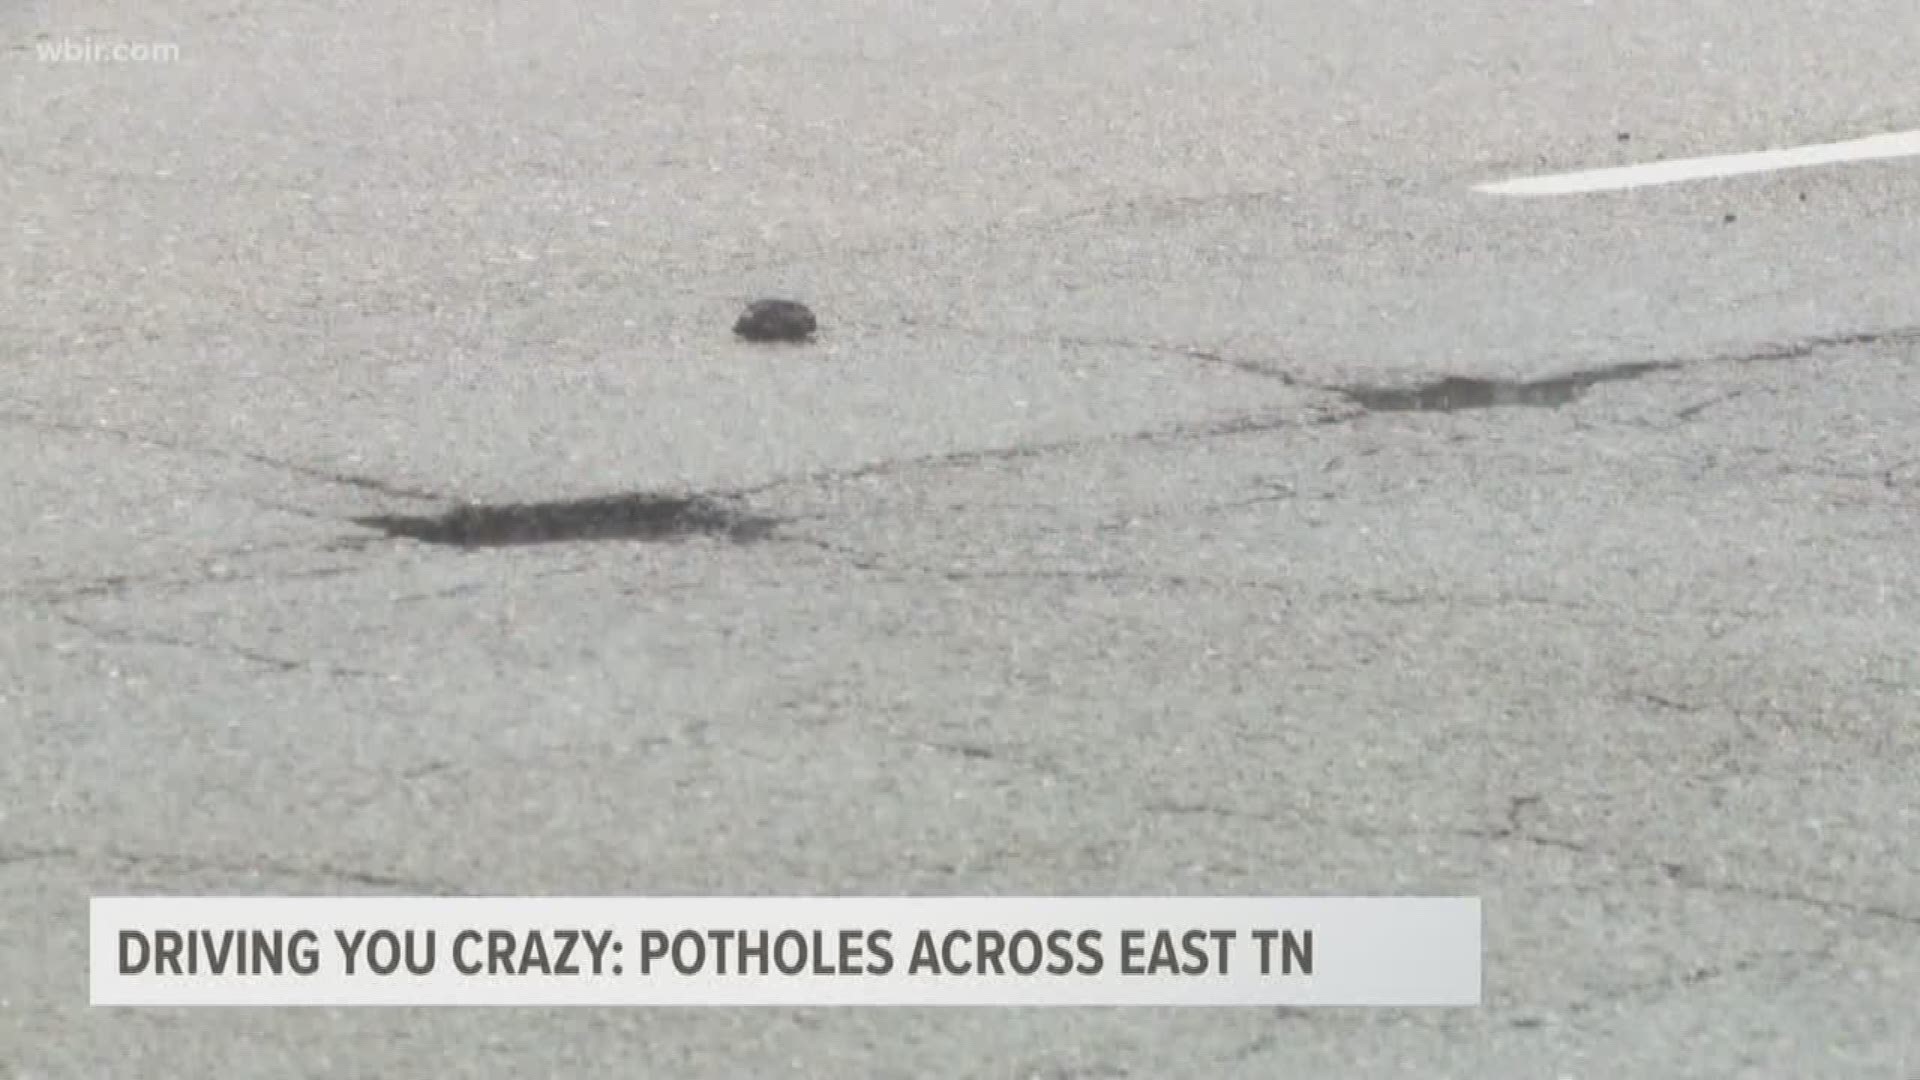 According to spokesperson Mark Nagi, crews are out every day patching up the pavement across East Tennessee.